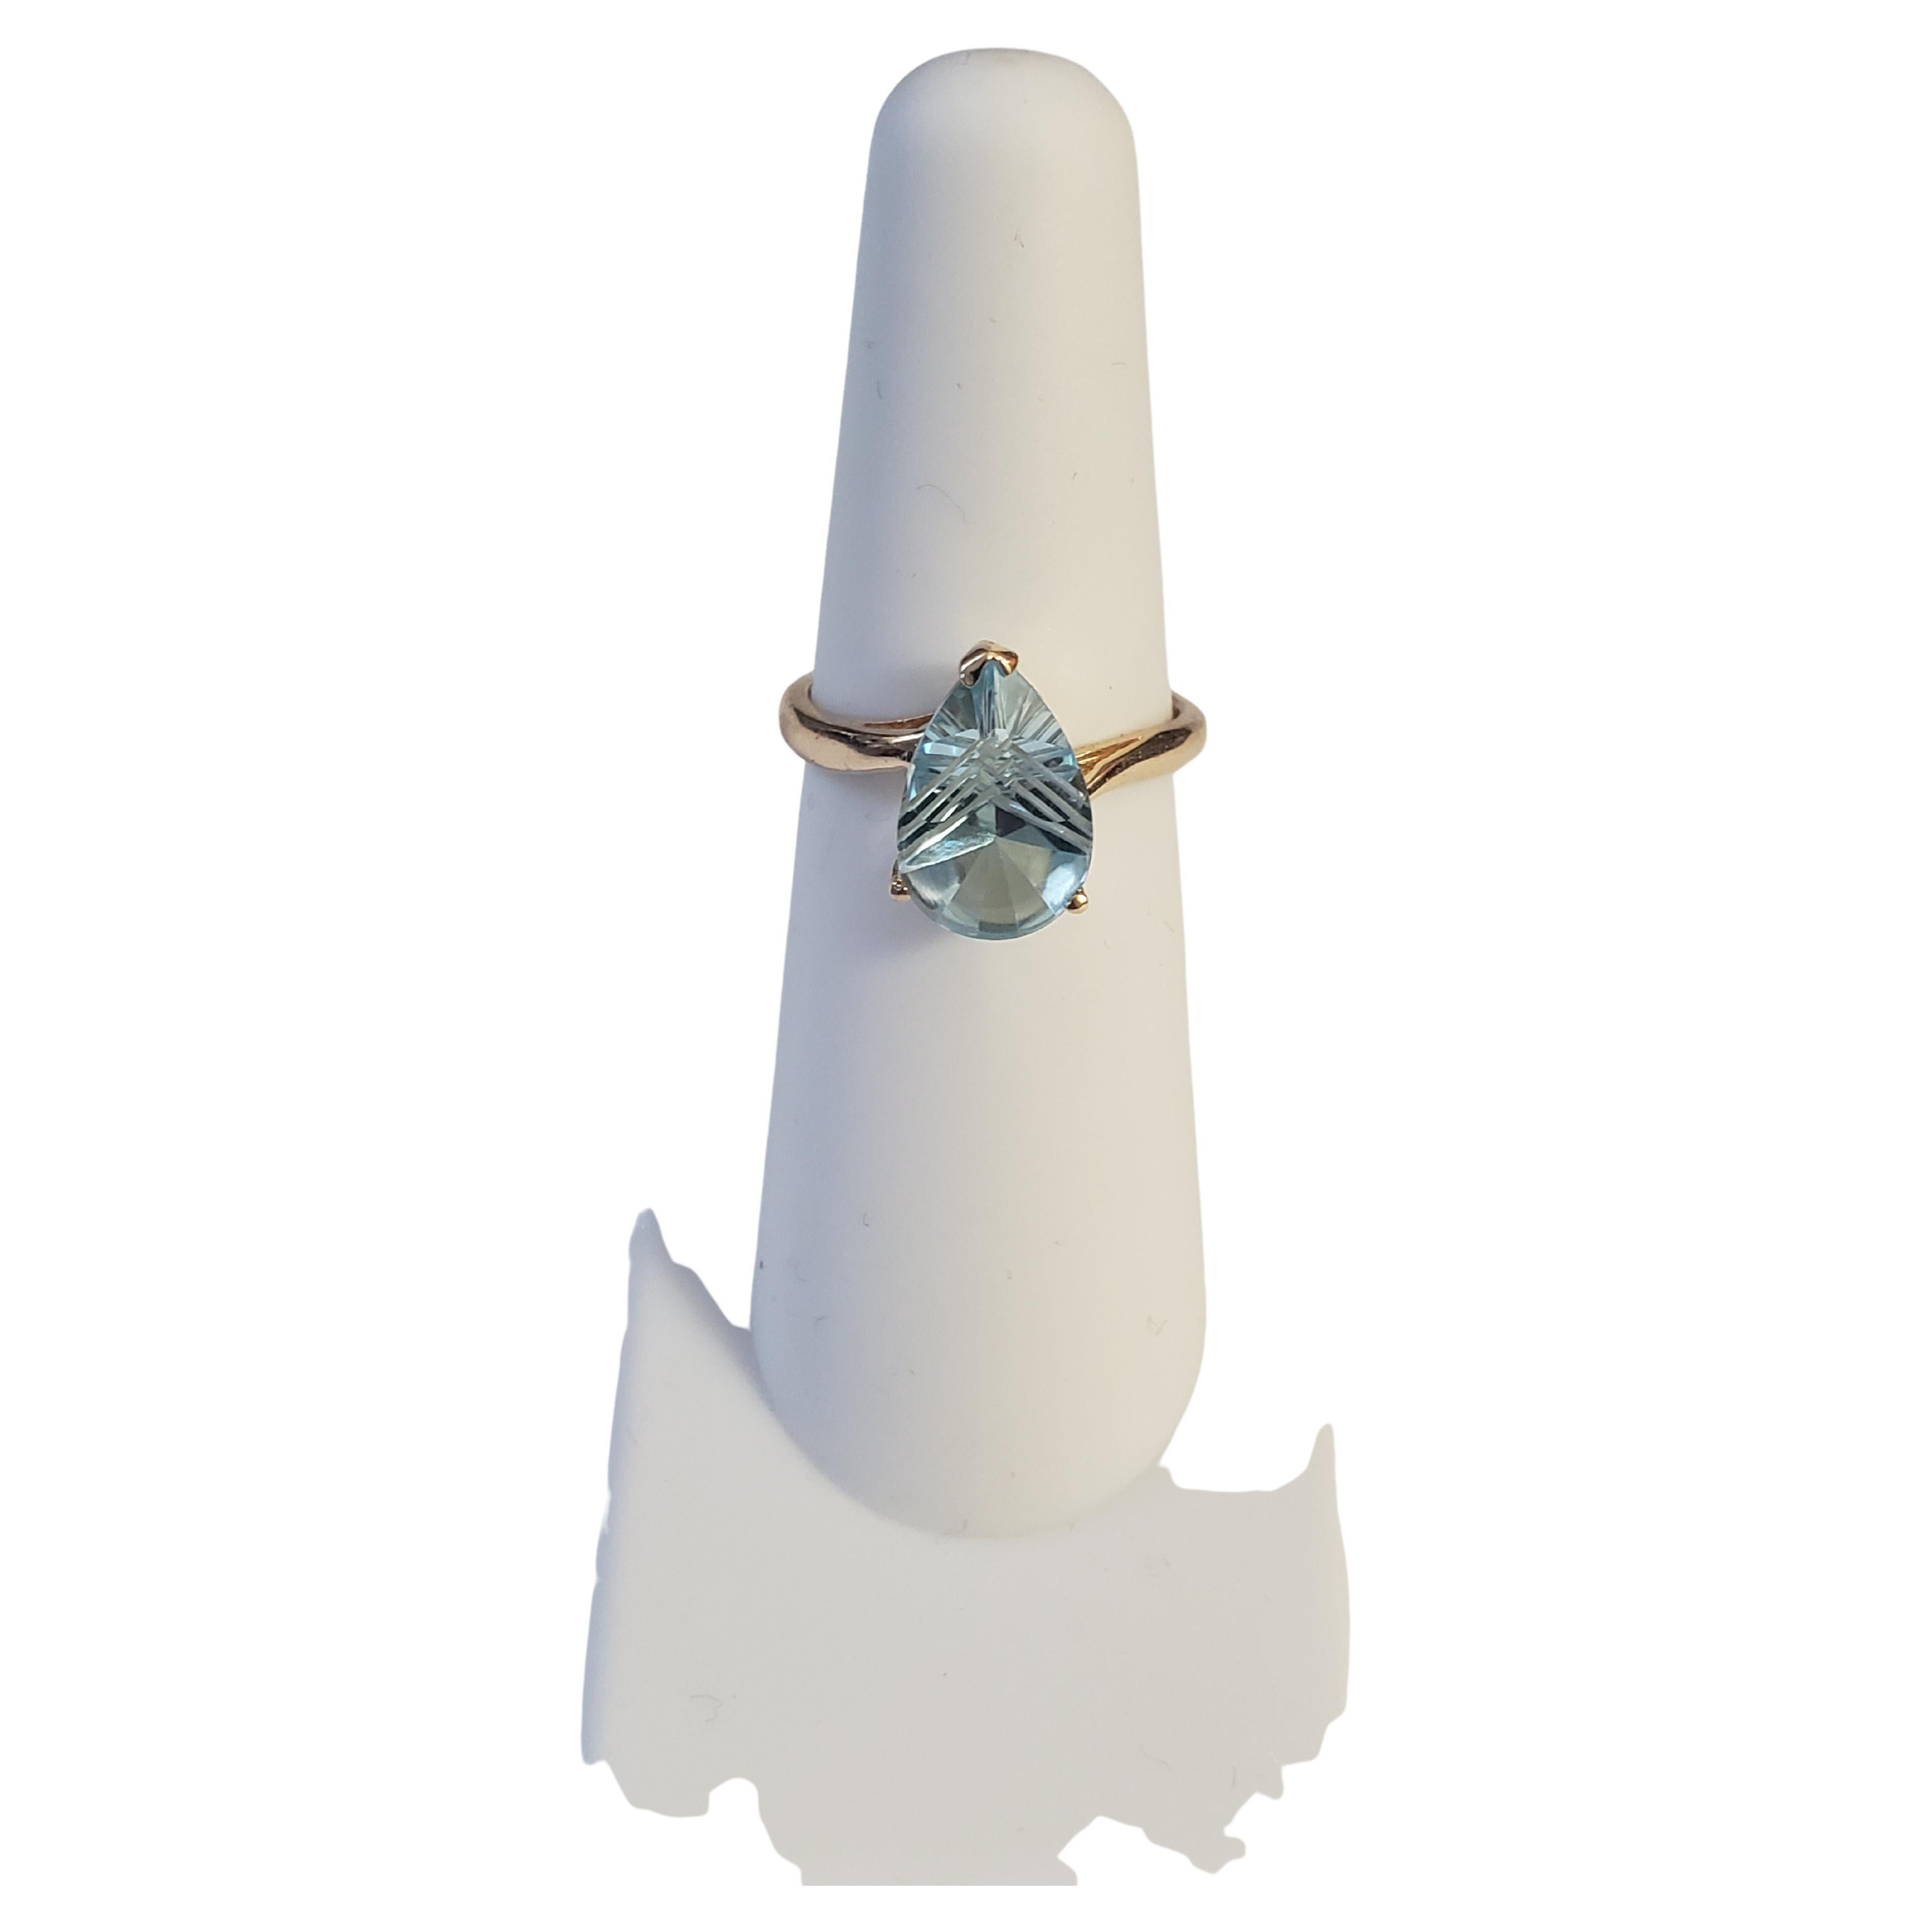 This beautiful ring from Fantasy features a special cut 3 Ct. natural sky blue topaz gemstone set in a 14K solid yellow gold band. The stunning pear-shaped stone is accented with a delicate crown design, giving it an antique and regal feel. This